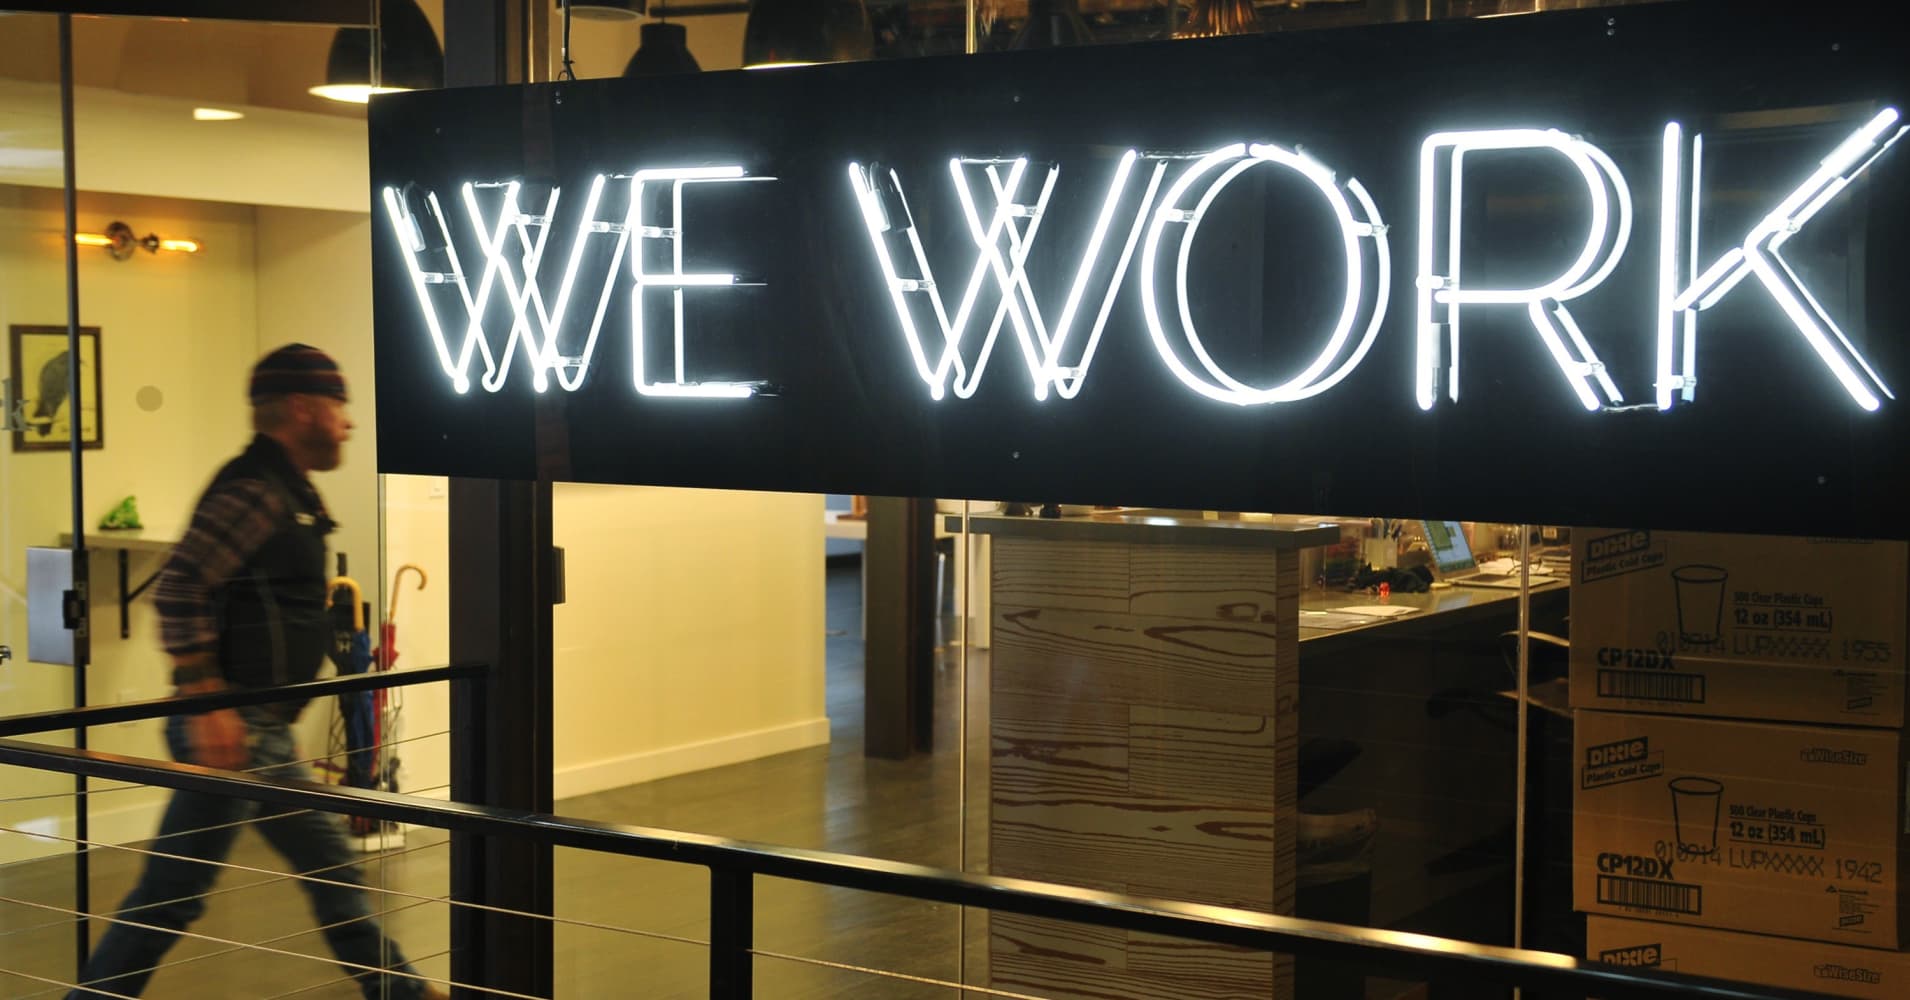 SoftBank invests billions less in WeWork than it originally planned, and now WeWork is rebranding